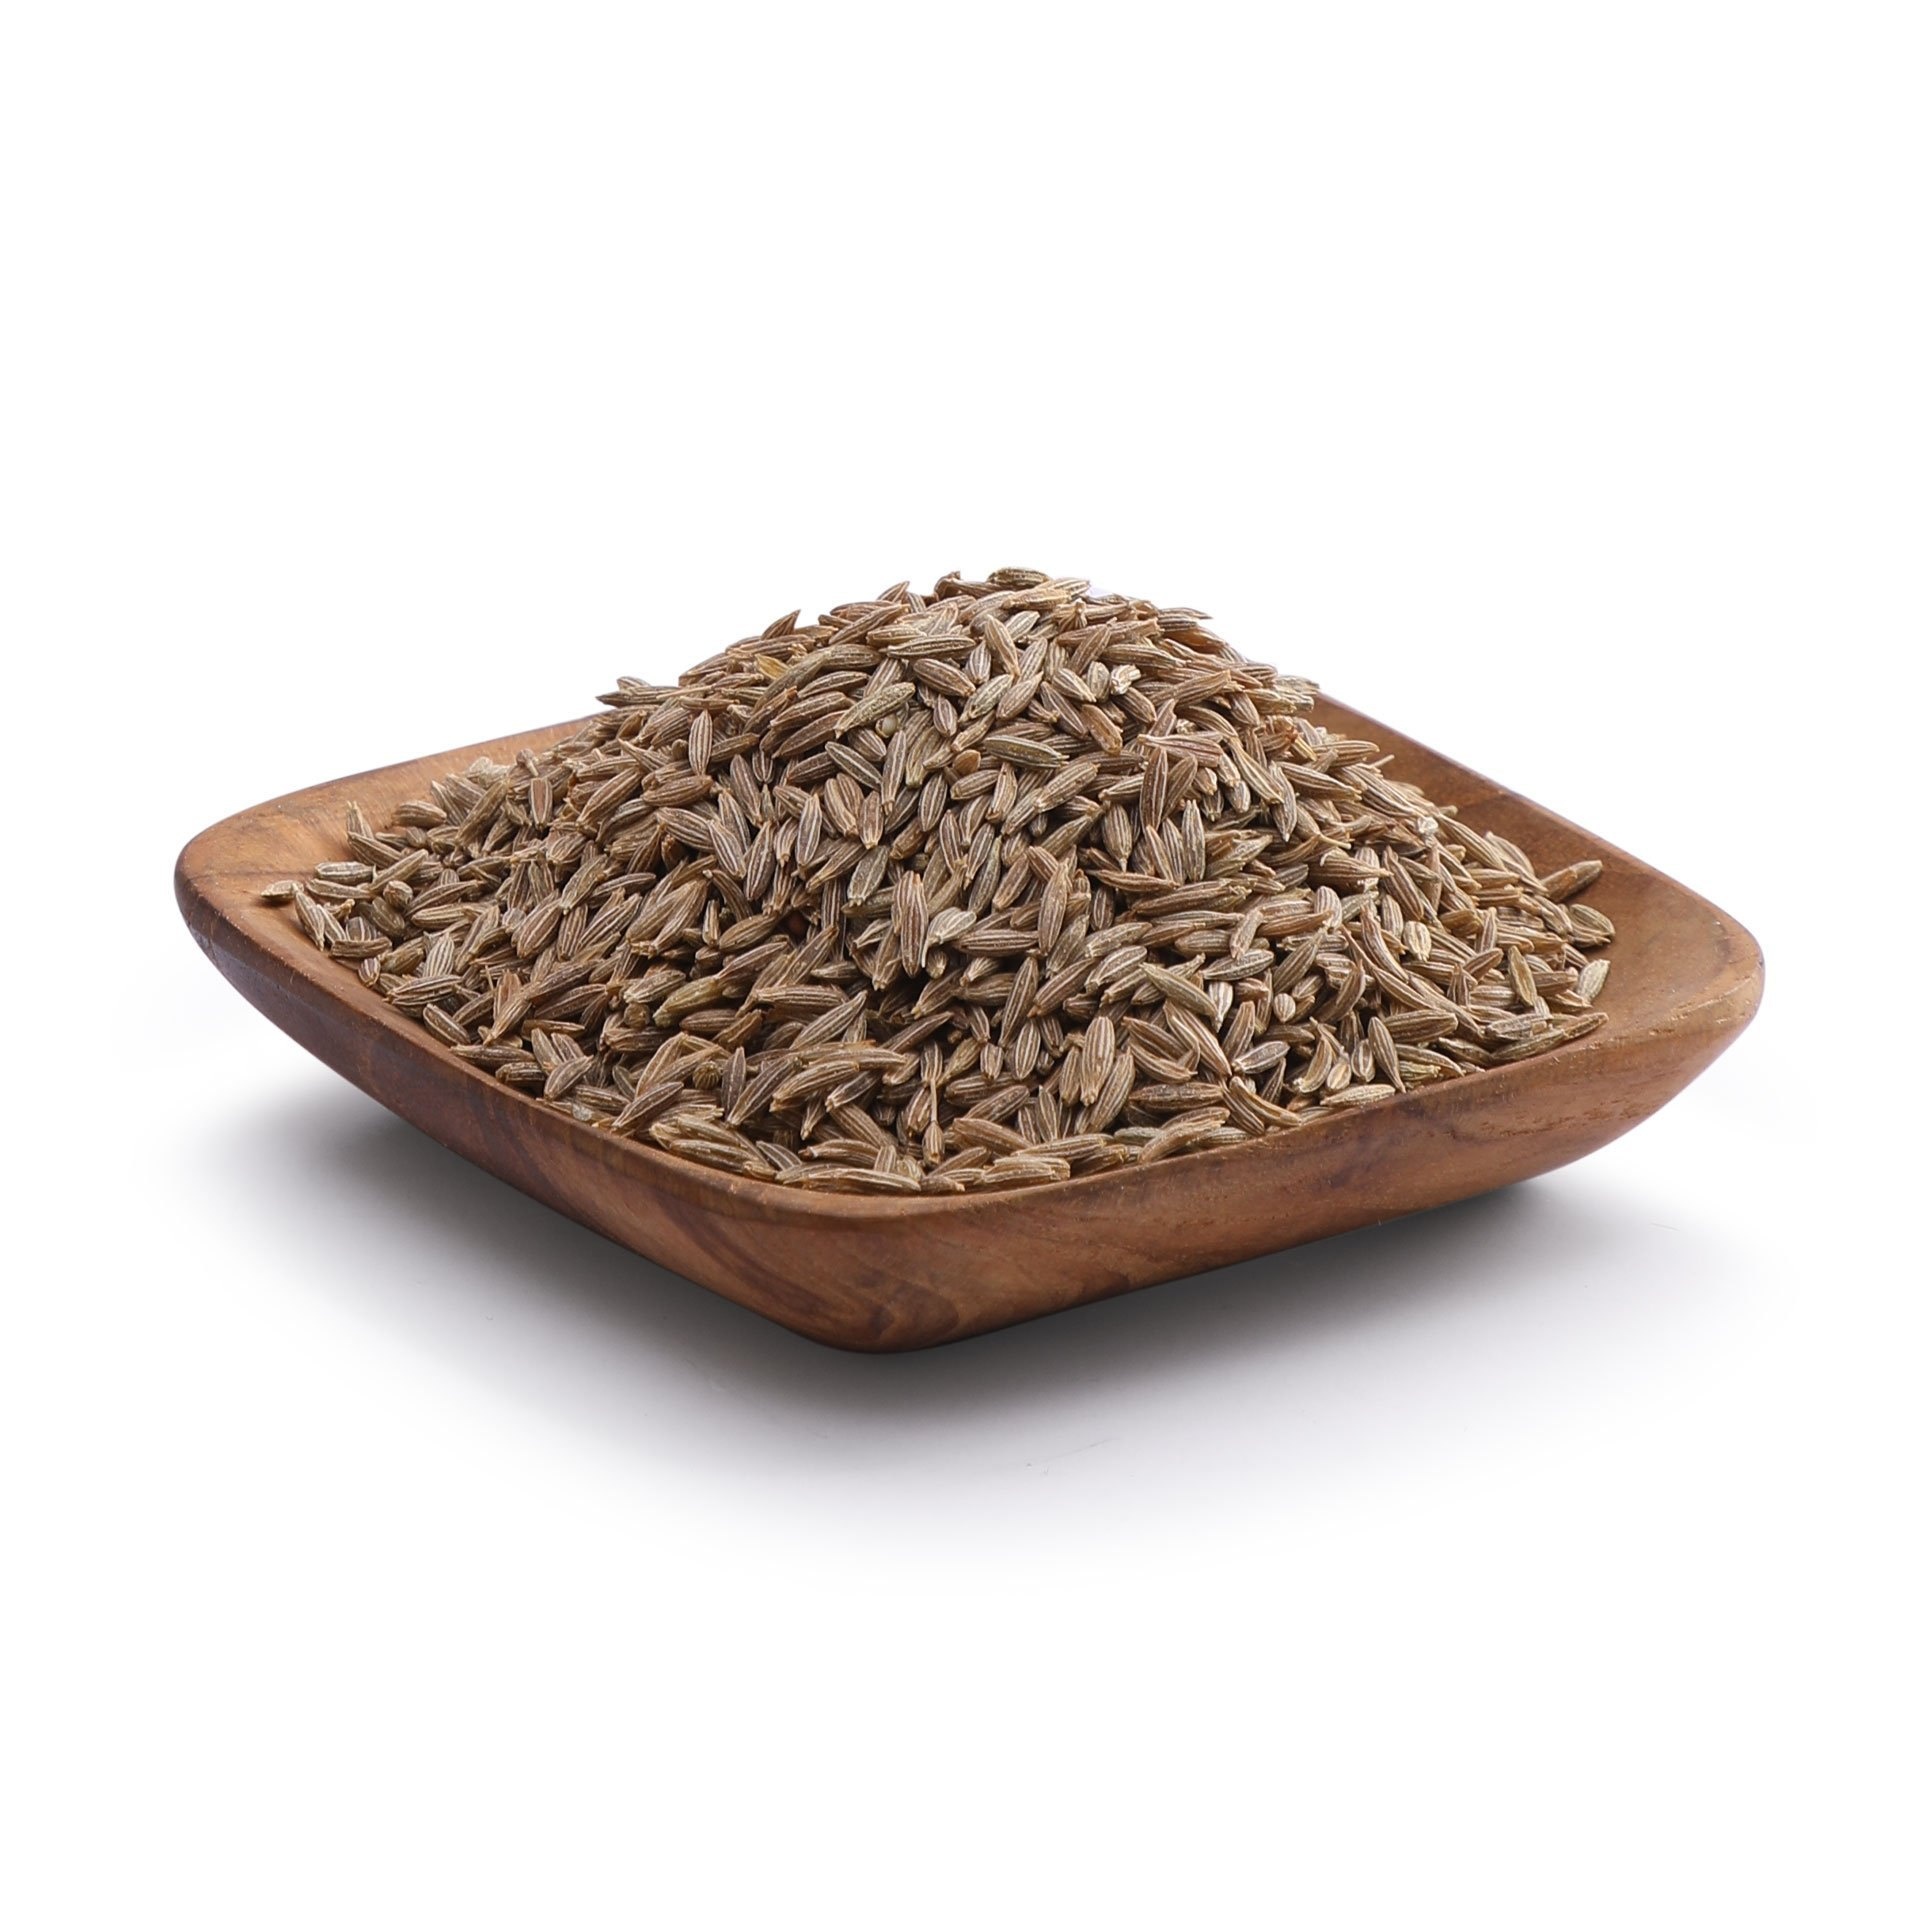 Cumin images, Free downloads, Spice photography, Culinary visuals, 1920x1920 HD Phone